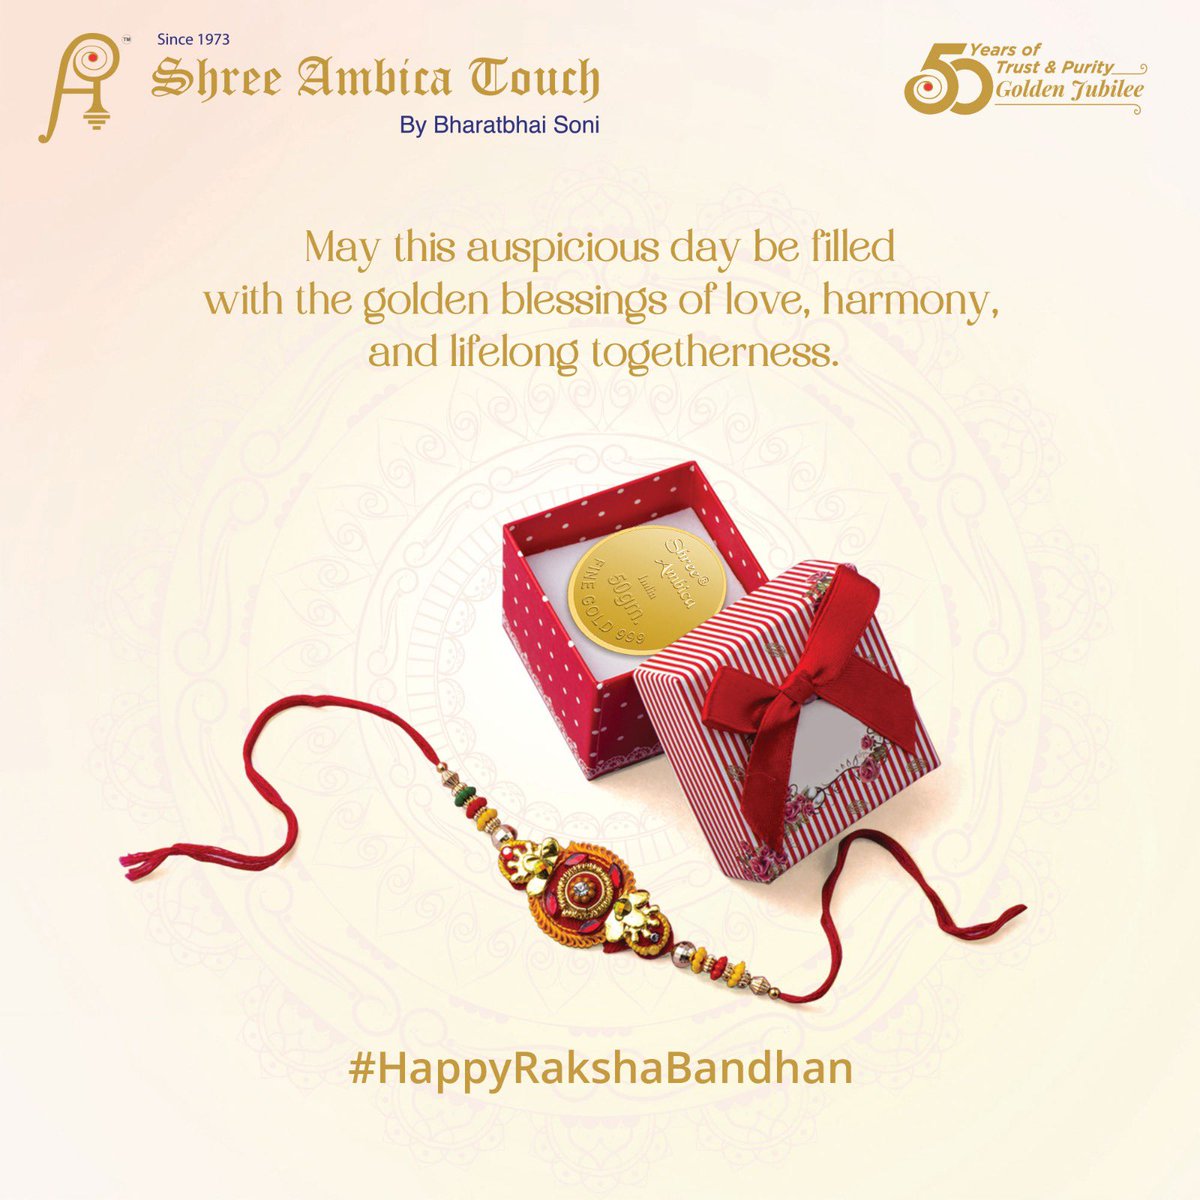 Wishing you a heartfelt Raksha Bandhan filled with love, protection, and the precious glow of pure gold. Celebrate the eternal bond of brothers and sisters!

#HappyRakshaBandhan ##celebrate #gift #giftgold #goldcoins #refinery #india #cgroad #manekchowk #newvadaj #satellite